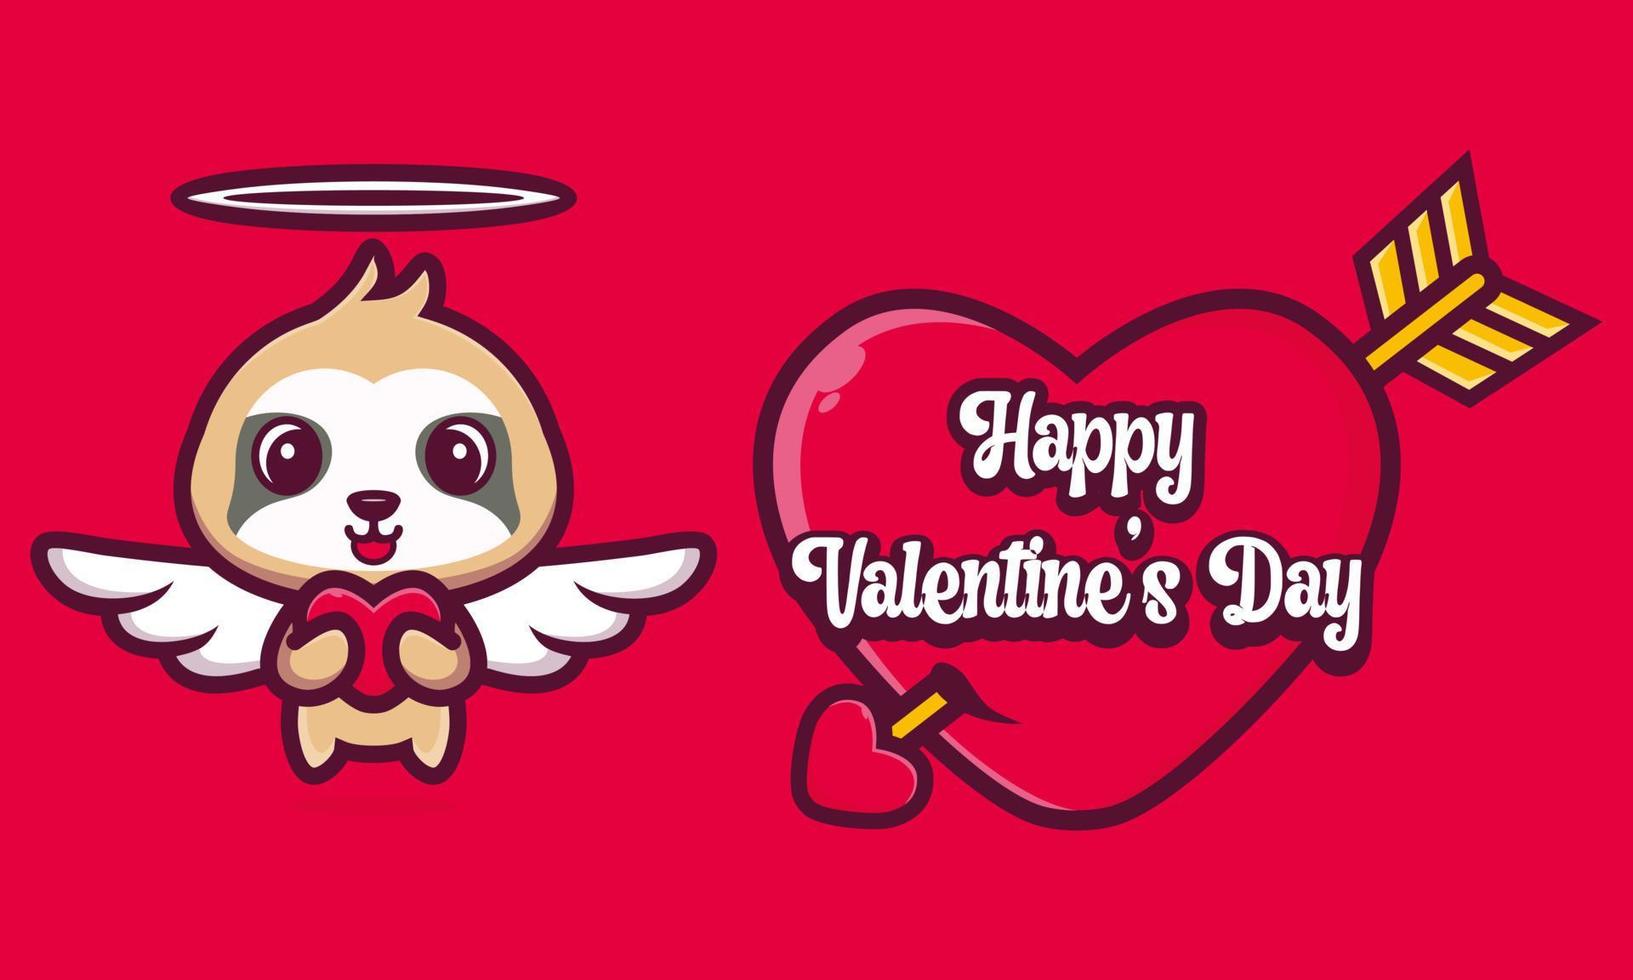 Cute sloth hugging a heart with happy valentine's day greetings vector